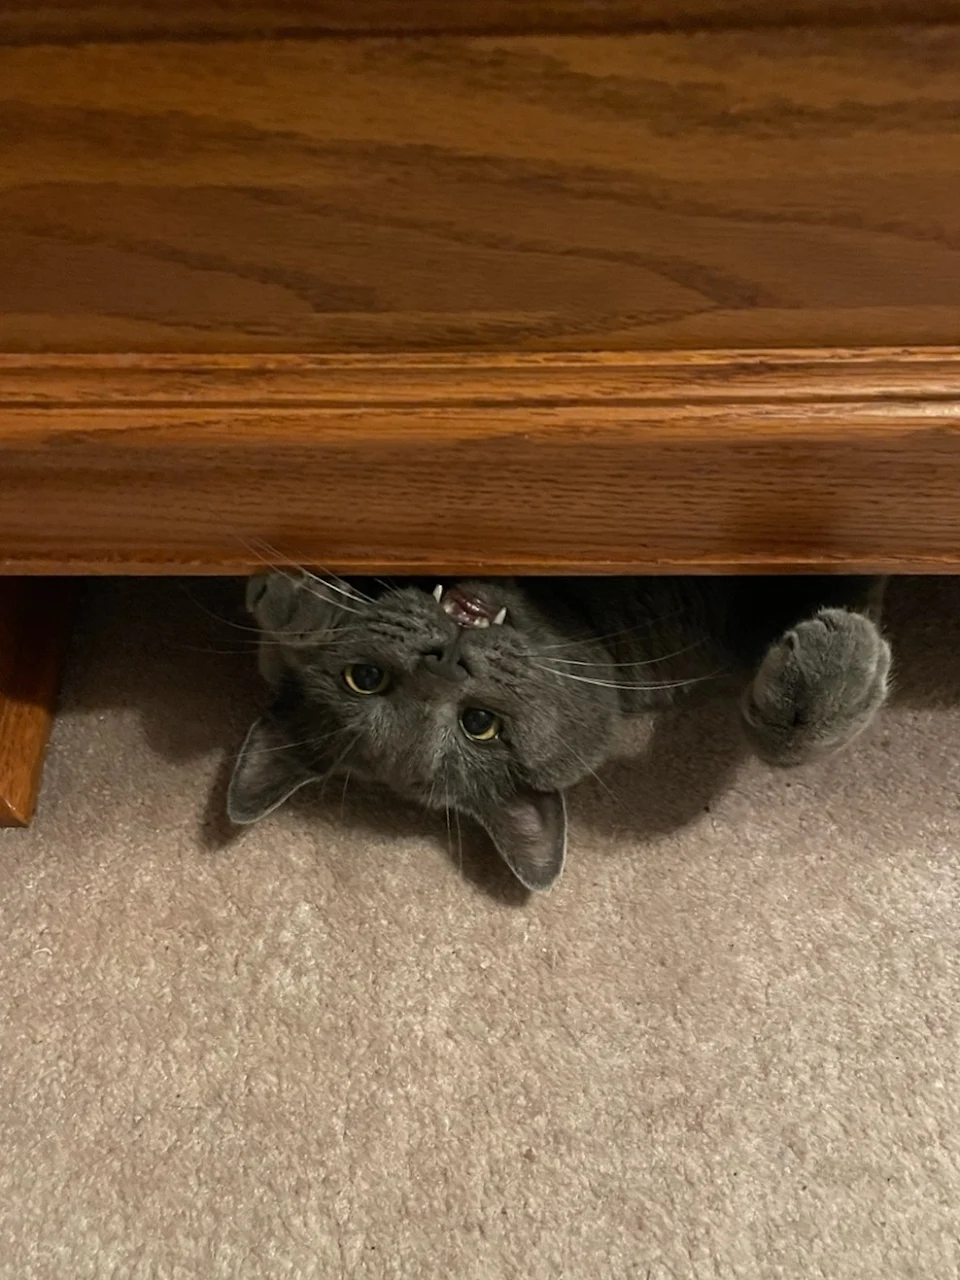 There's a monster under my bed.